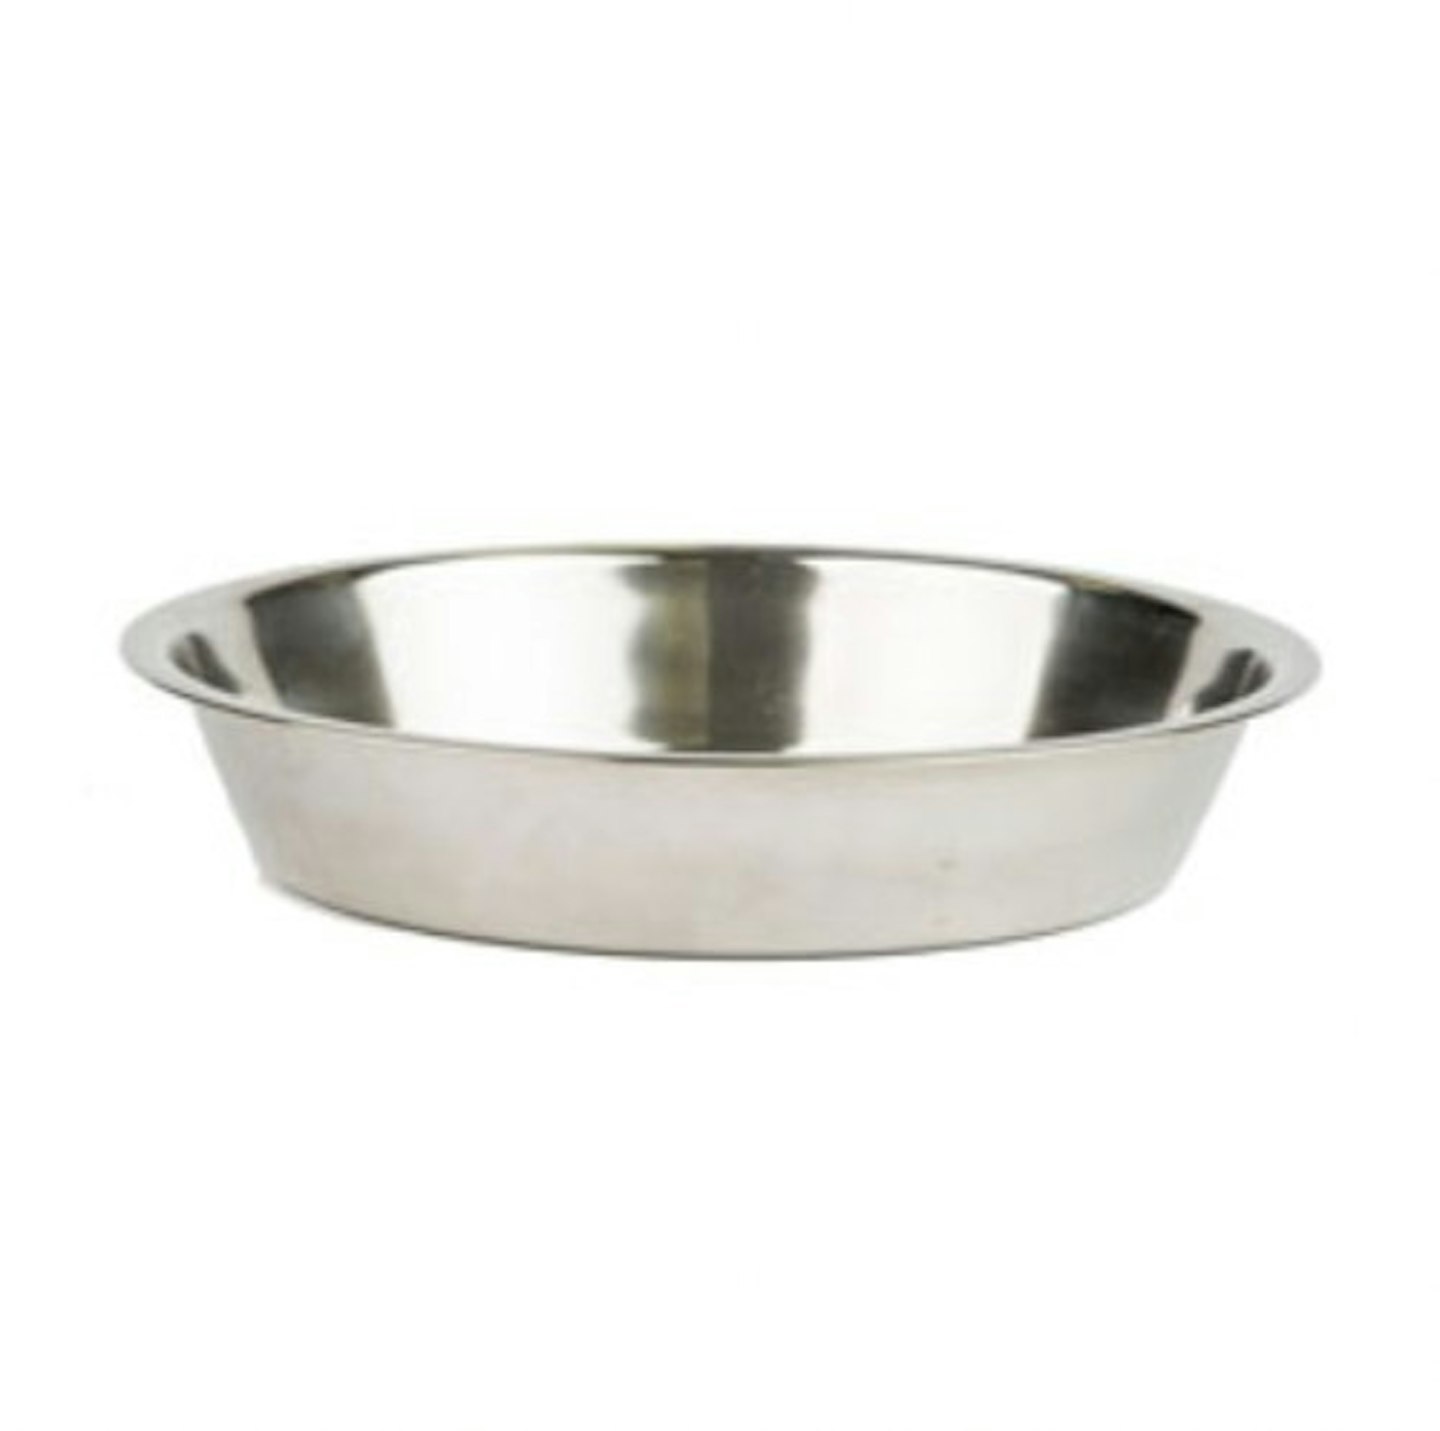 Pets At Home Stainless Steel Puppy Bowl